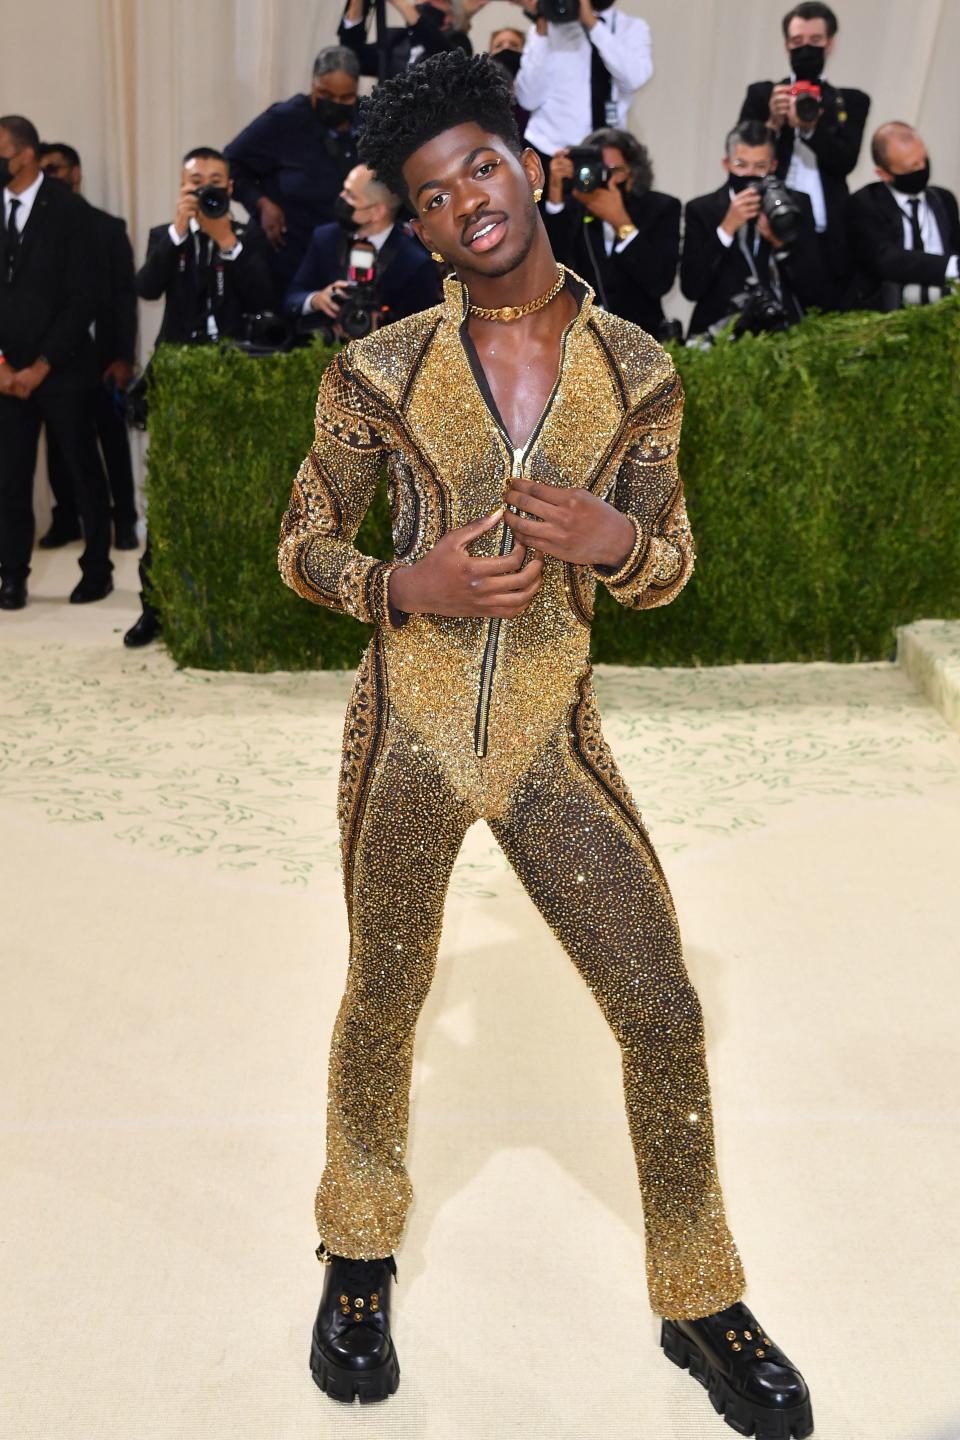 Lil Nas attends The 2021 Met Gala Celebrating In America: A Lexicon Of Fashion at Metropolitan Museum of Art on September 13, 2021 in New York City. (Getty Images)